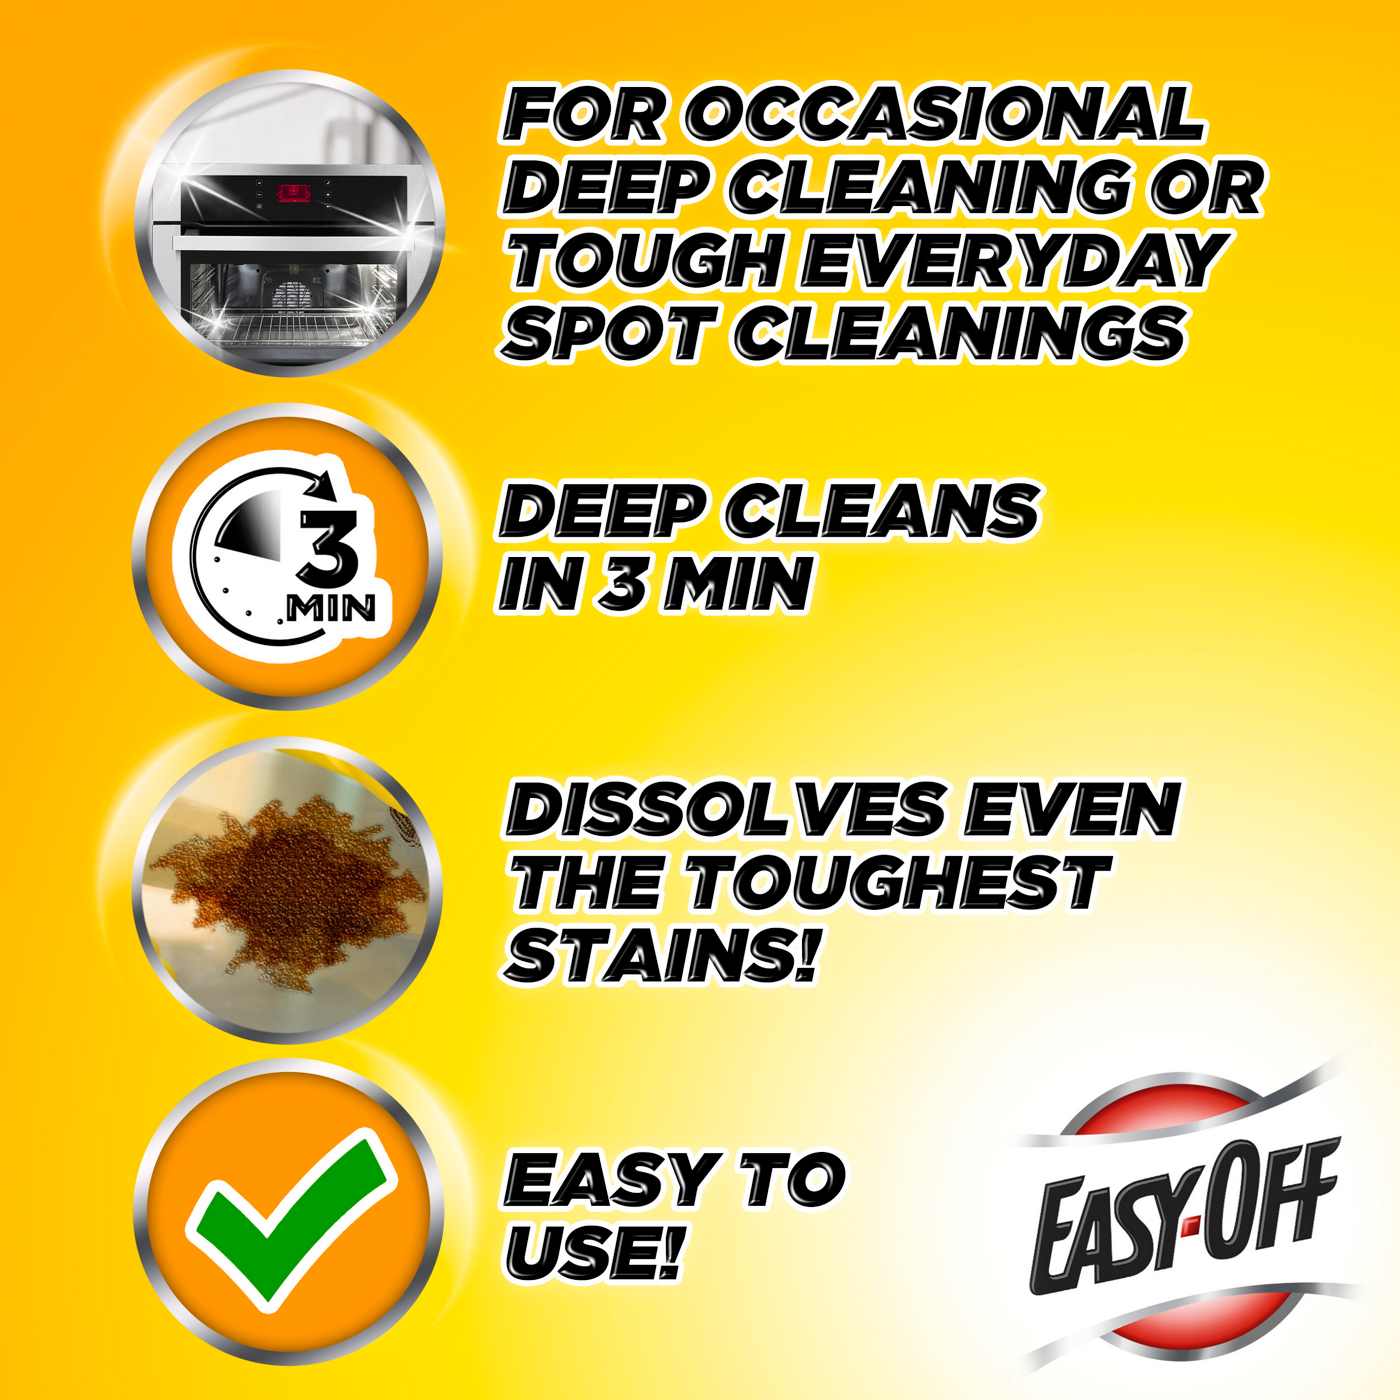 Easy-Off Heavy Duty Oven Cleaner